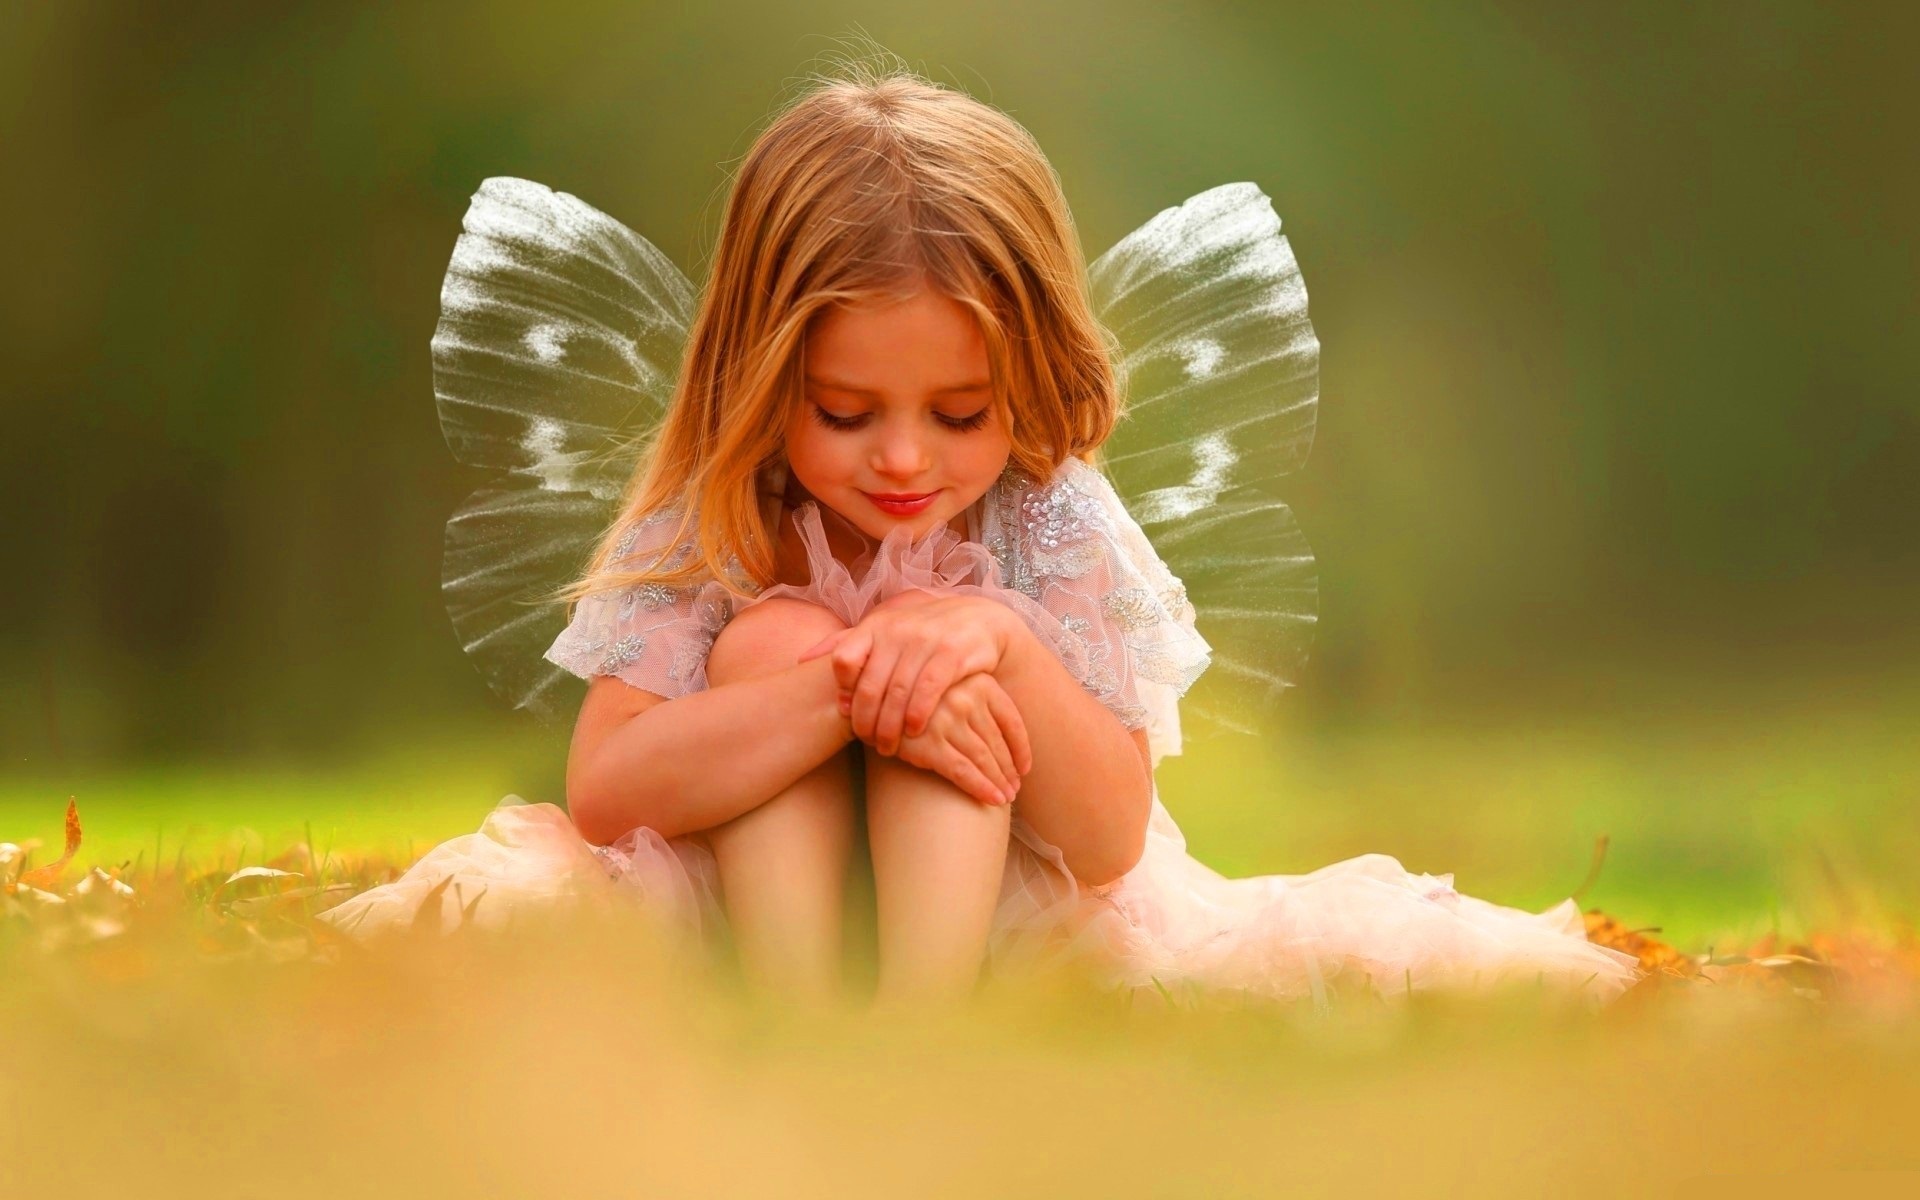 Download Fairy wings cute baby girl wallpaper - Cute baby for your mobile  cell phone